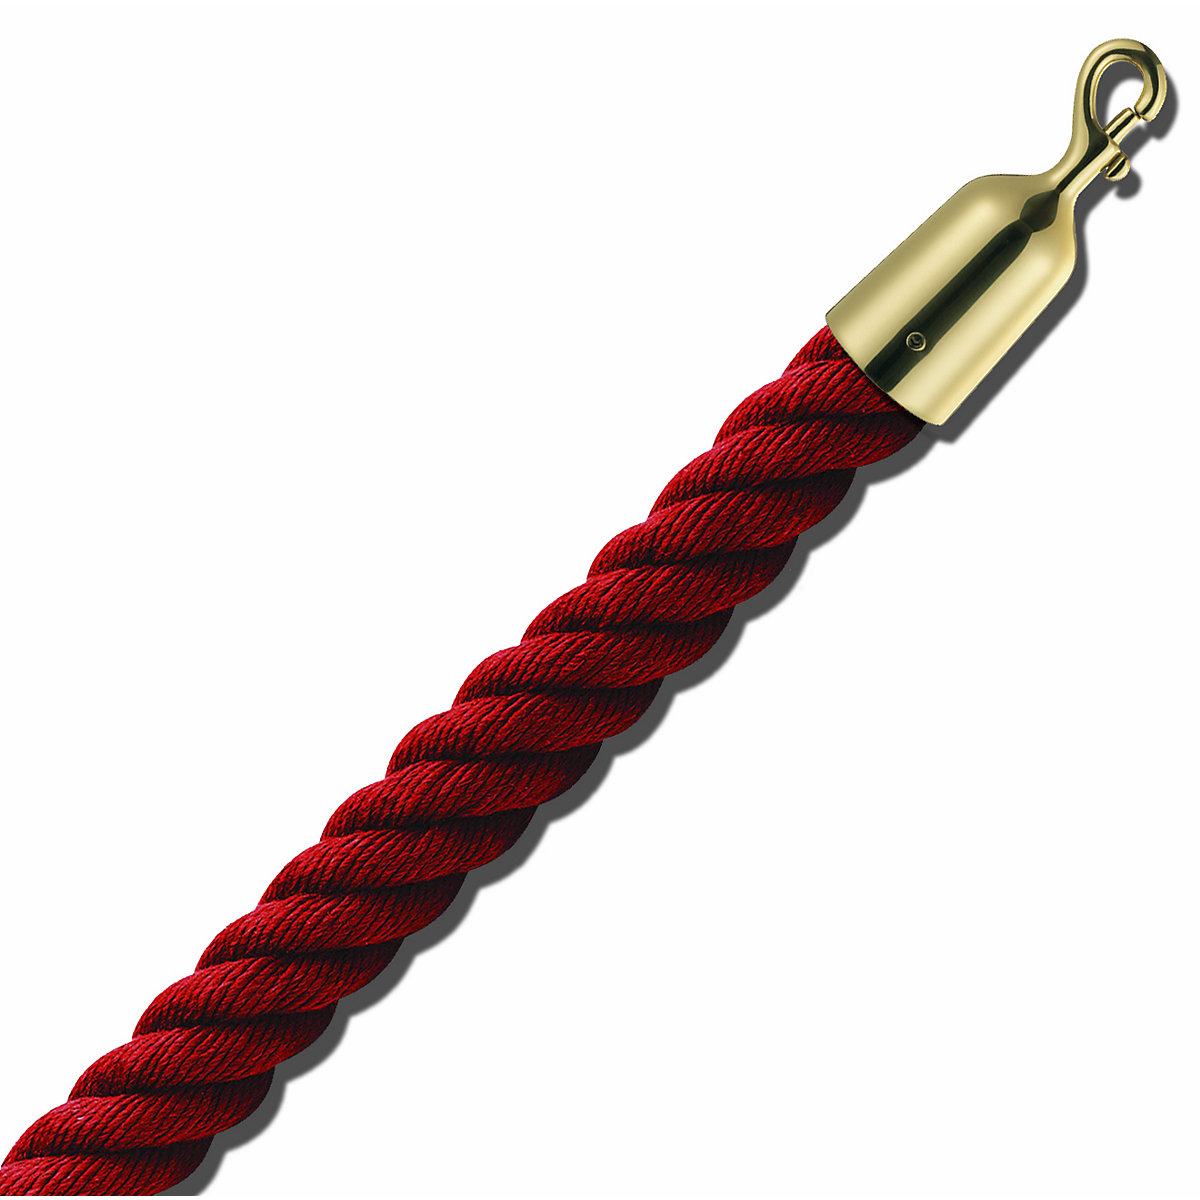 Barrier cord 1.5 m, brass end caps, red cord-5